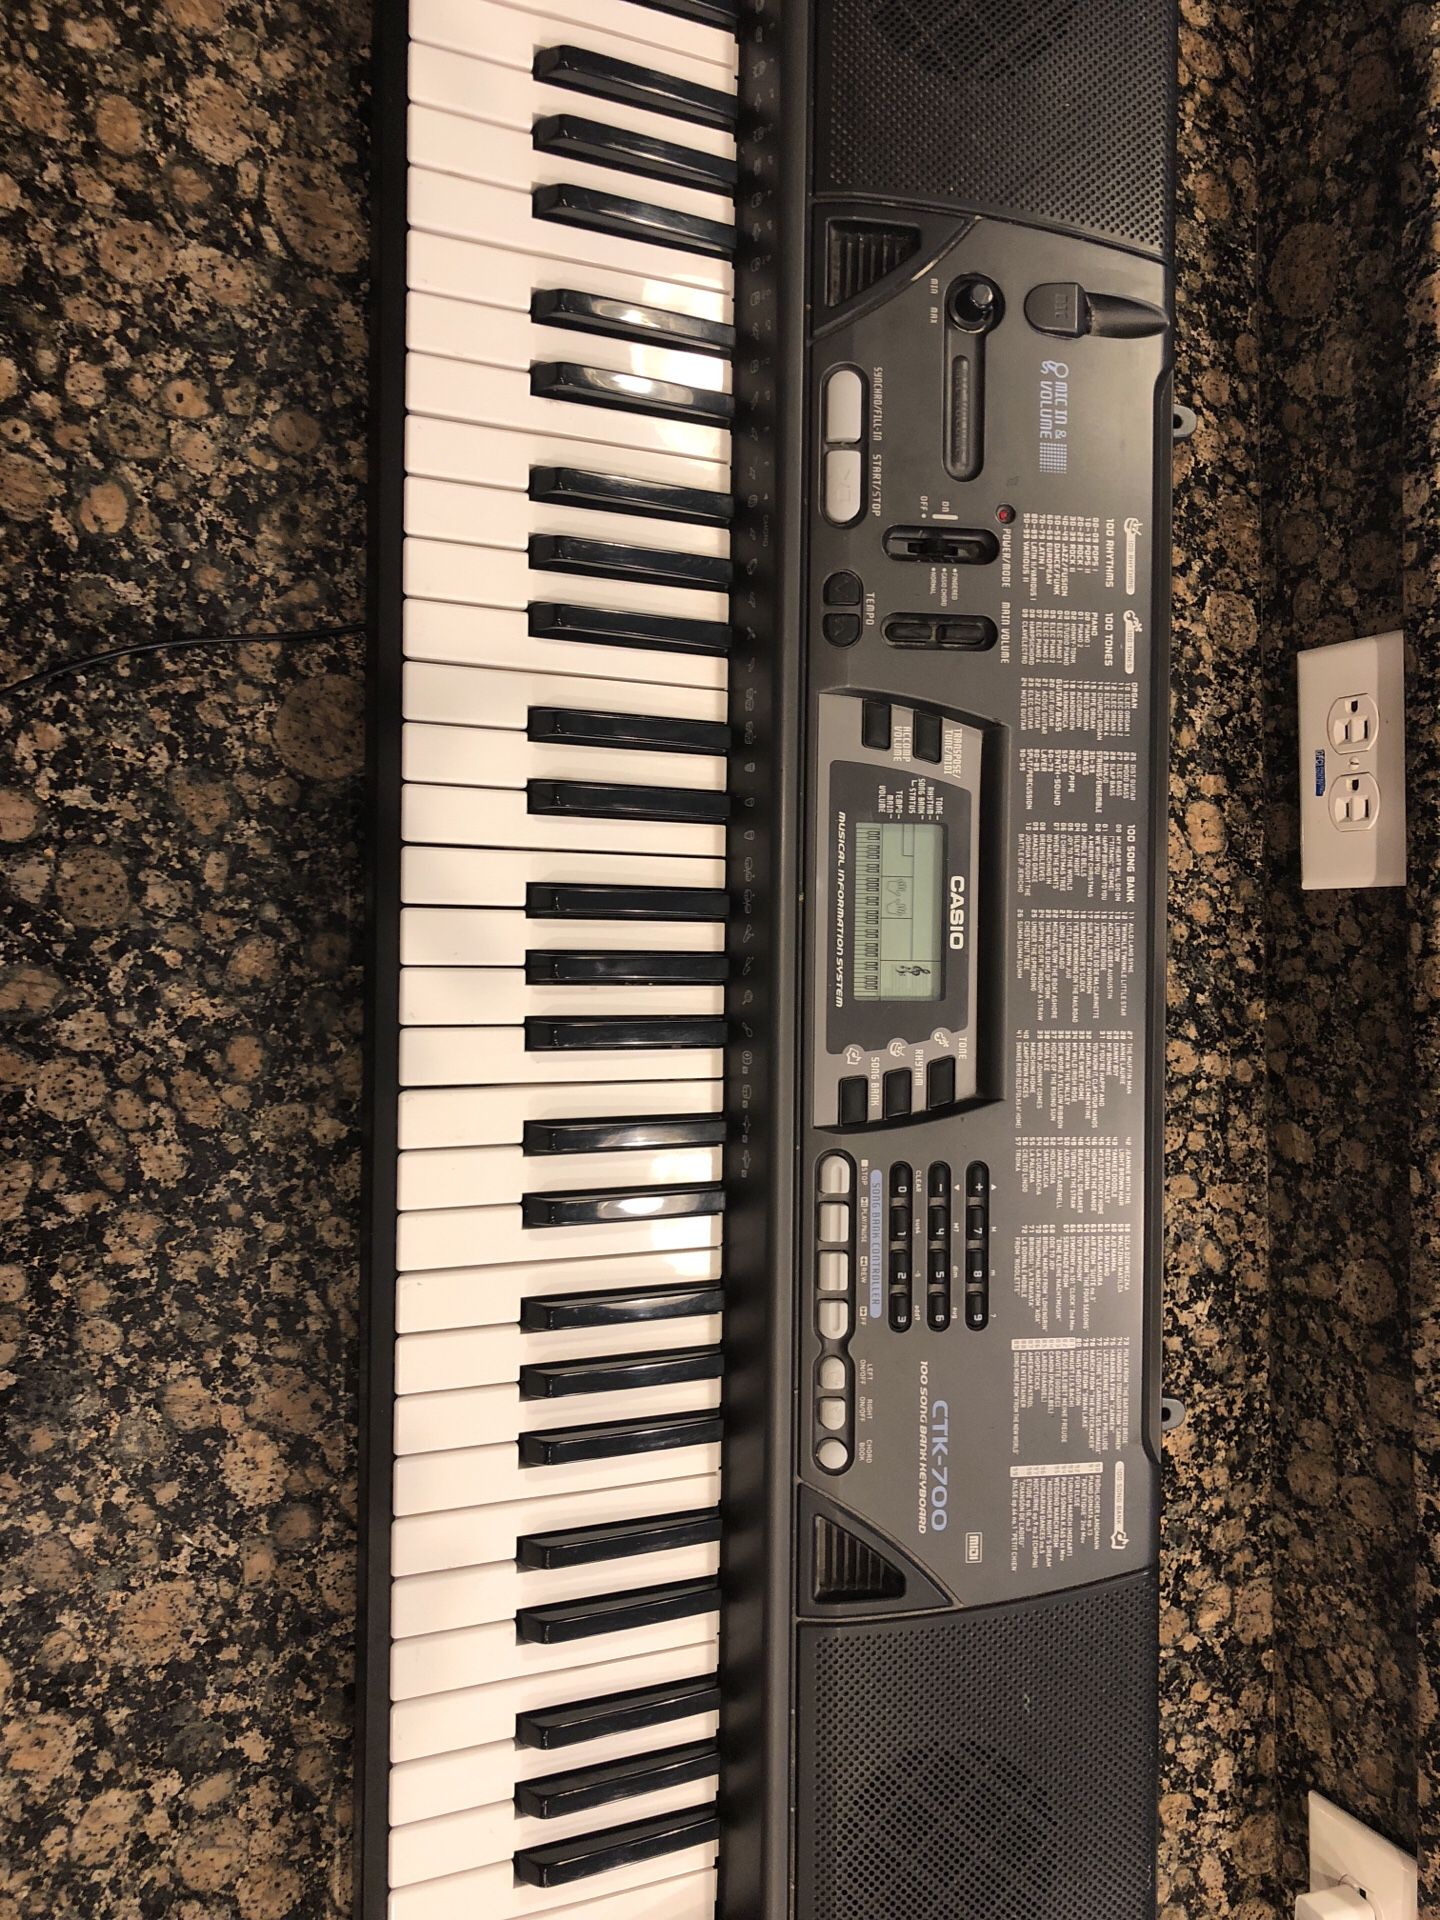 Casio CTK-700 keyboard with stand.